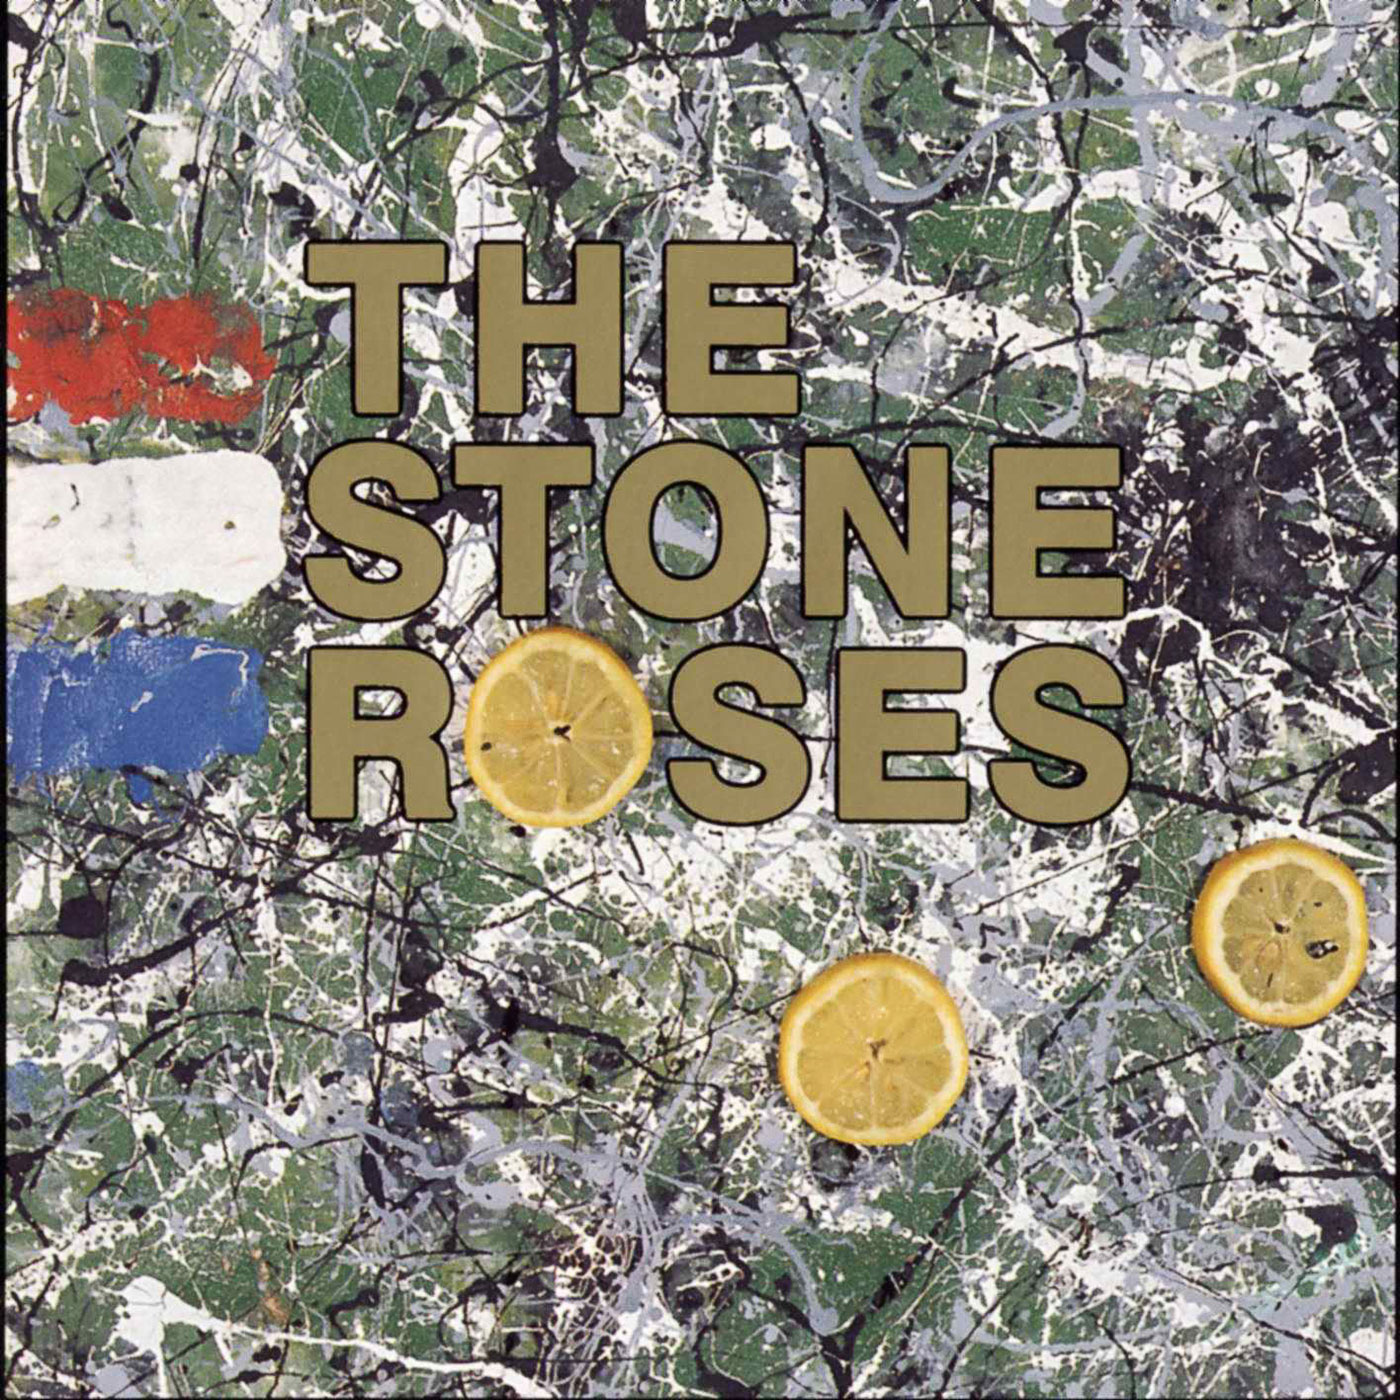 647 The Stone Roses - The Stone Roses